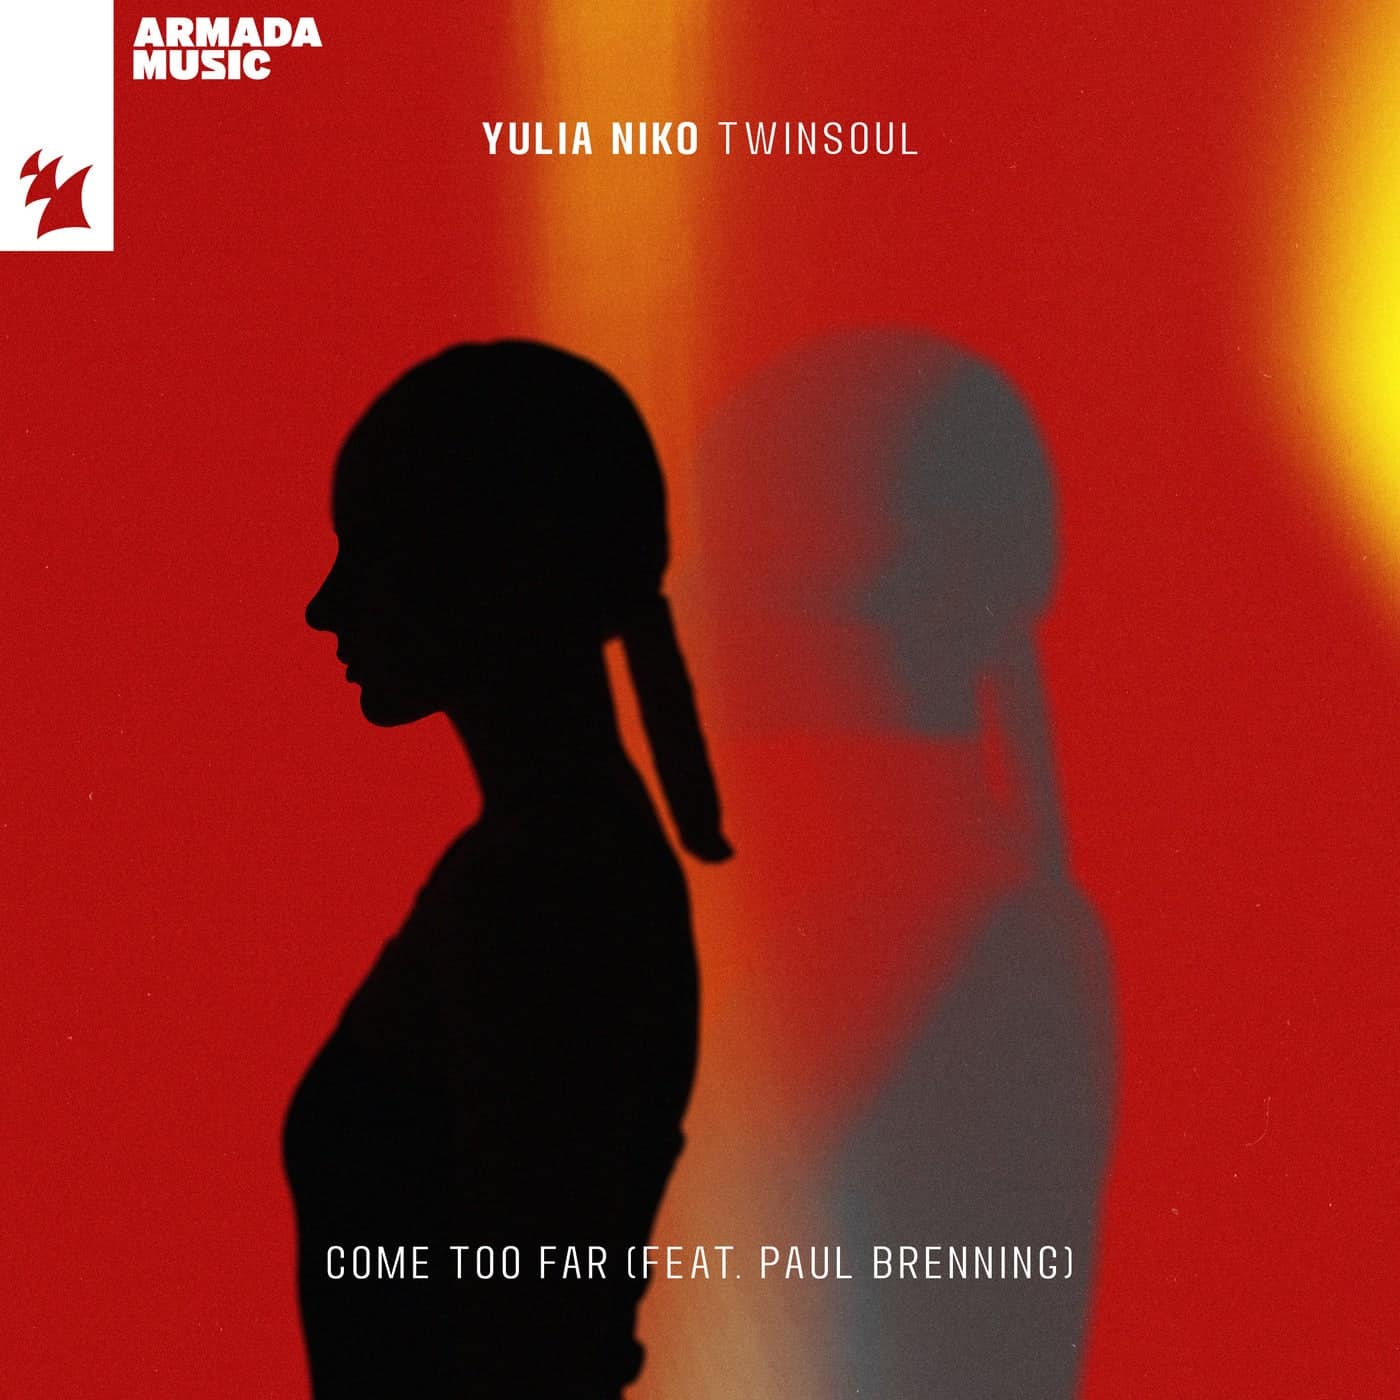 image cover: Come Too Far by Paul Brenning, Yulia Niko on Armada Music